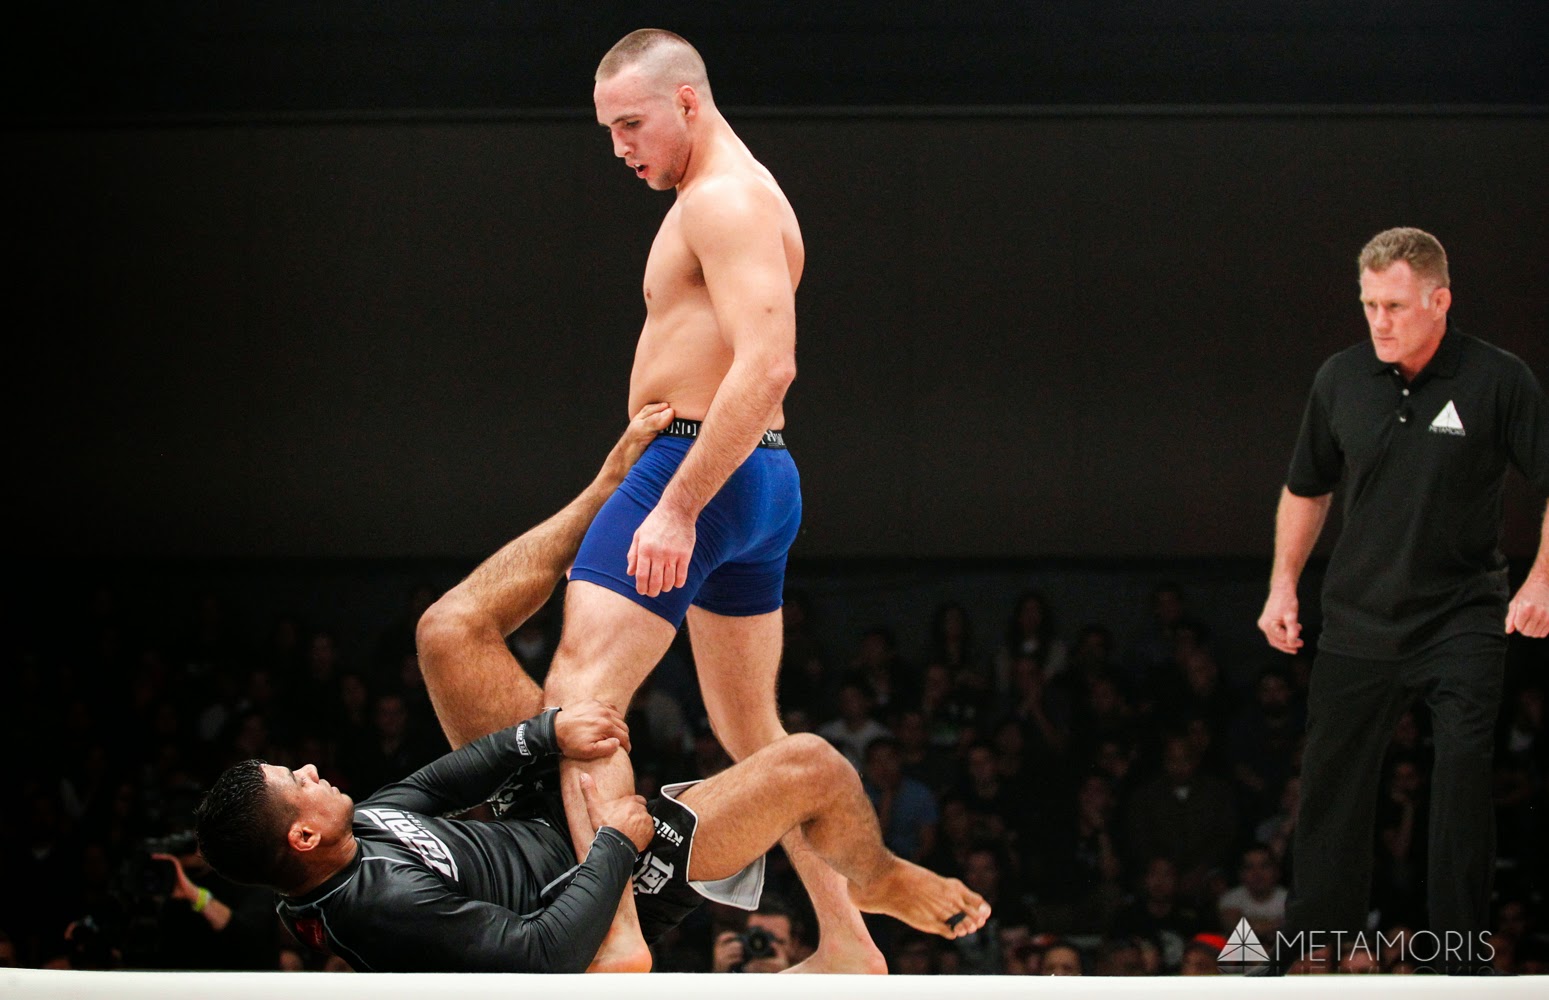 JT Torres in Favor of Judges to Decide Outcome of Metamoris Matches